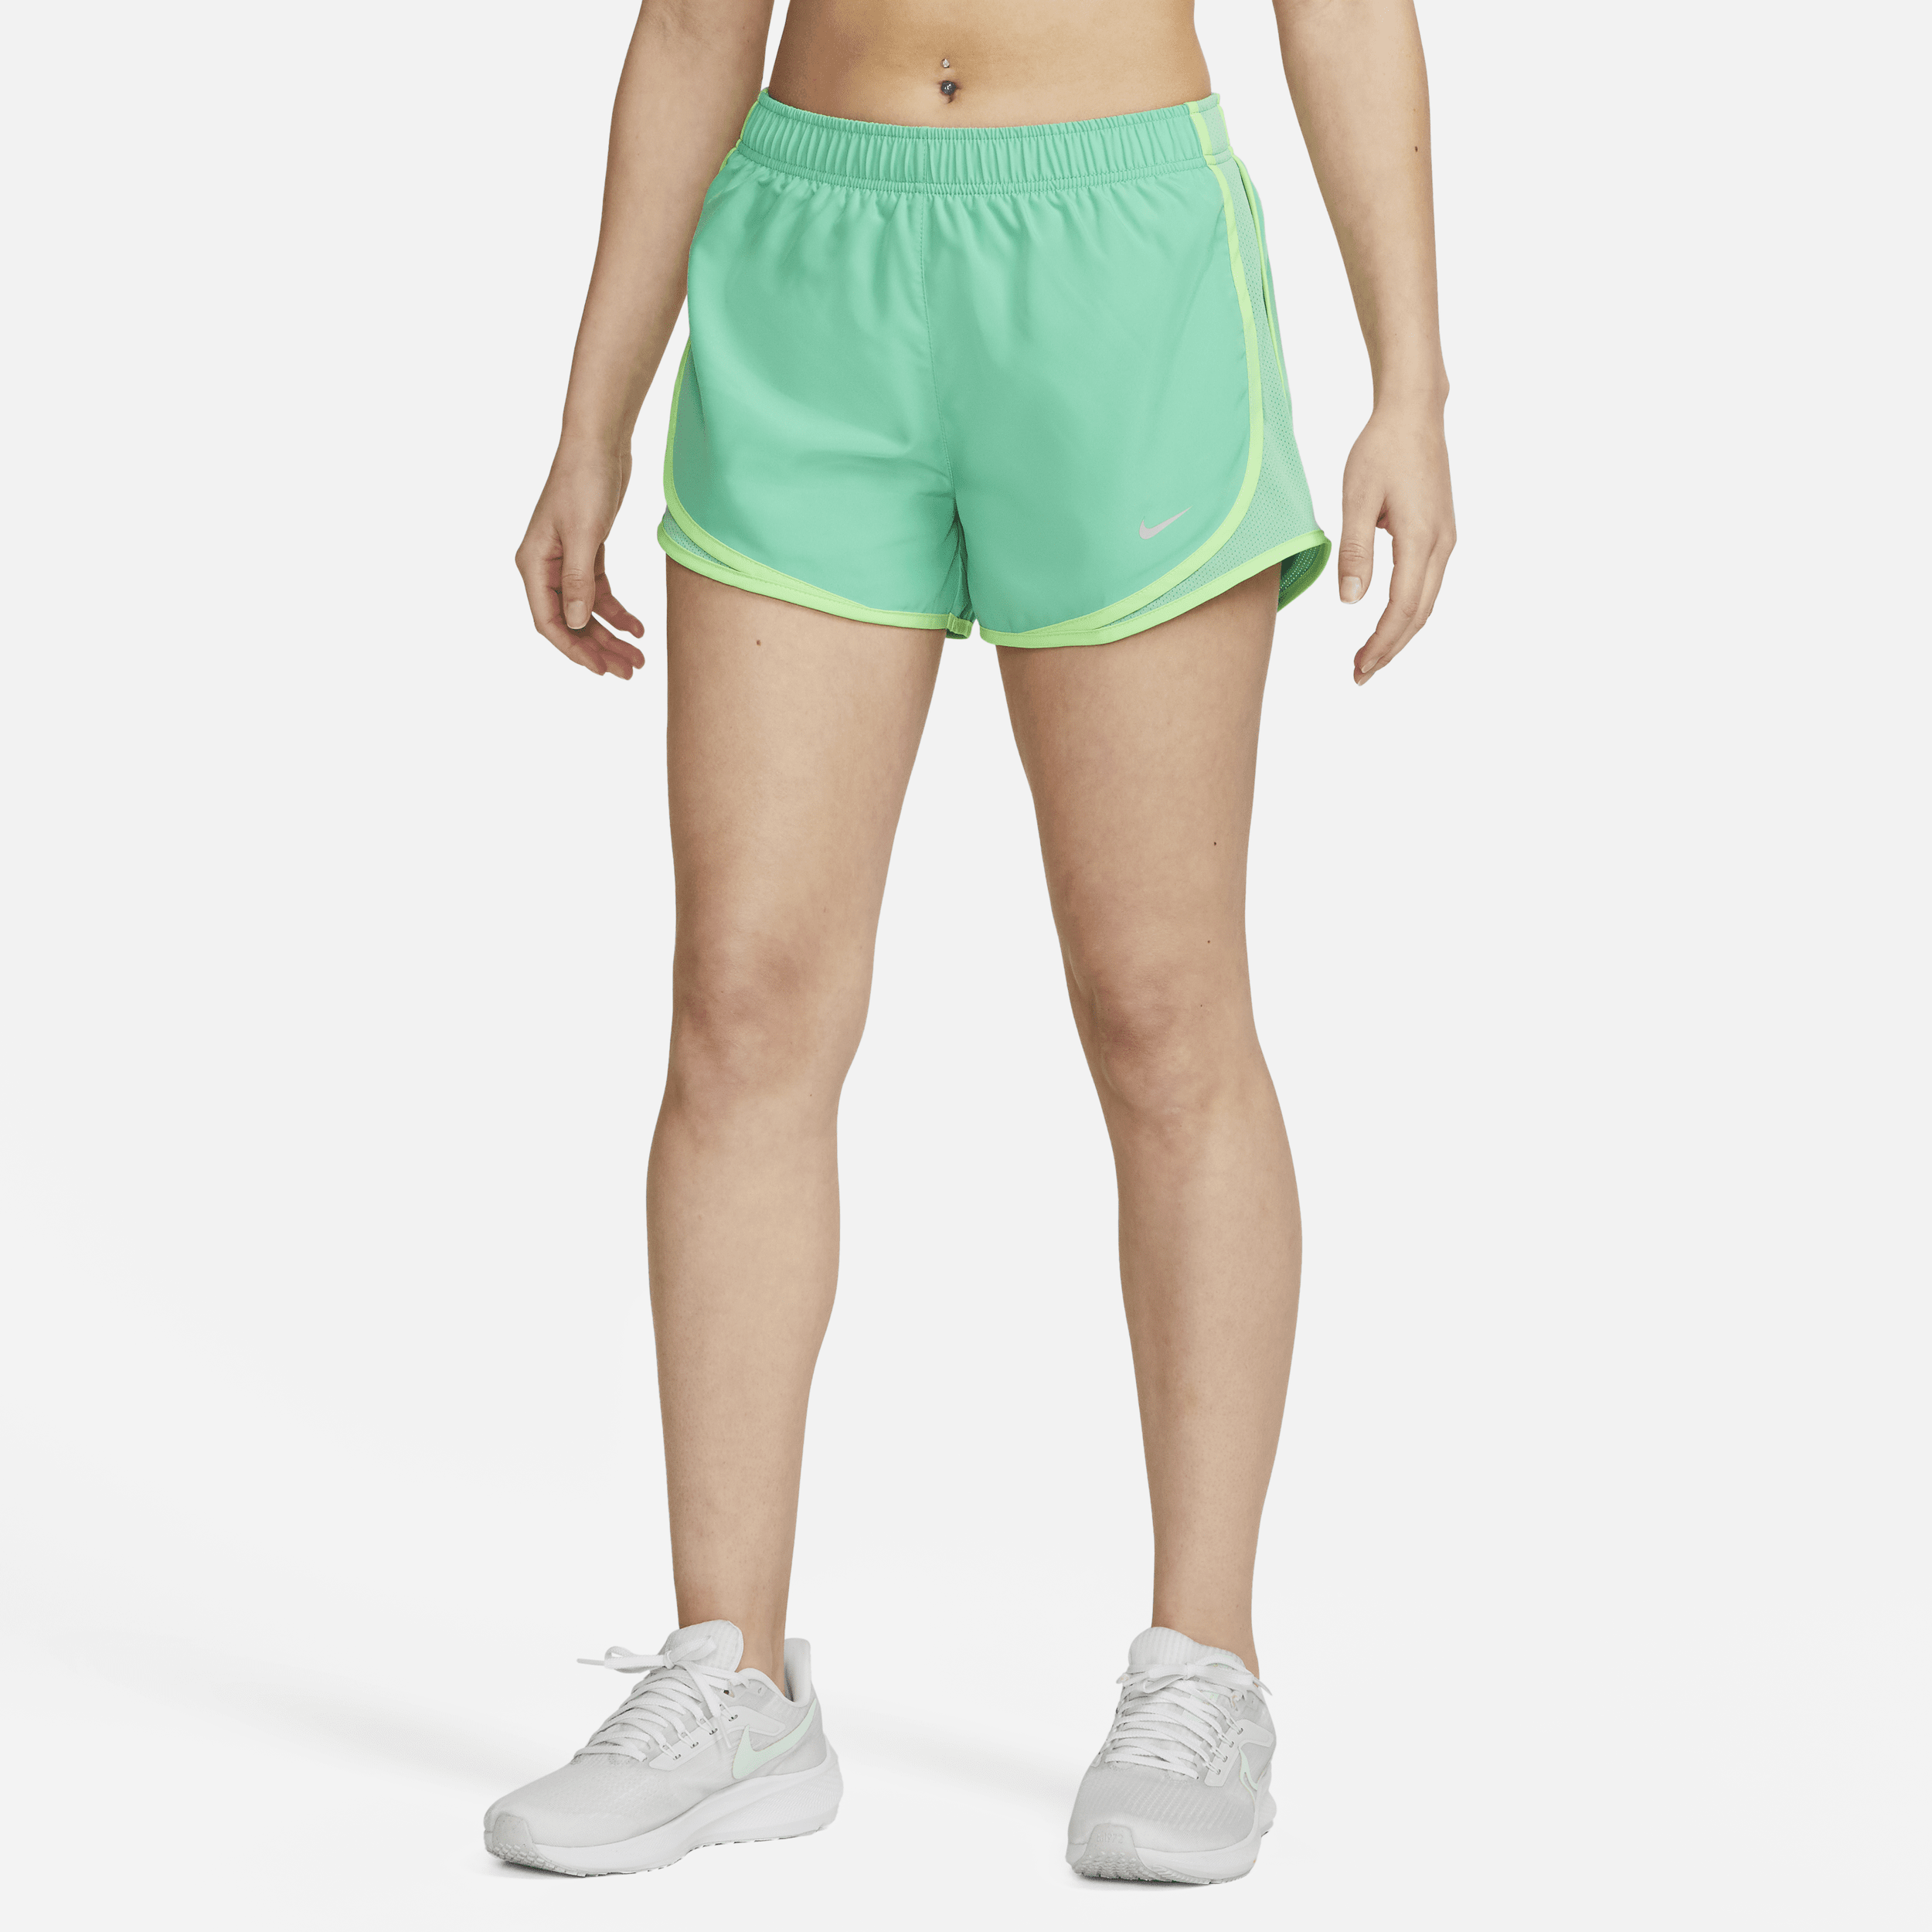 NIKE WOMEN'S TEMPO BRIEF-LINED RUNNING SHORTS,1009761956